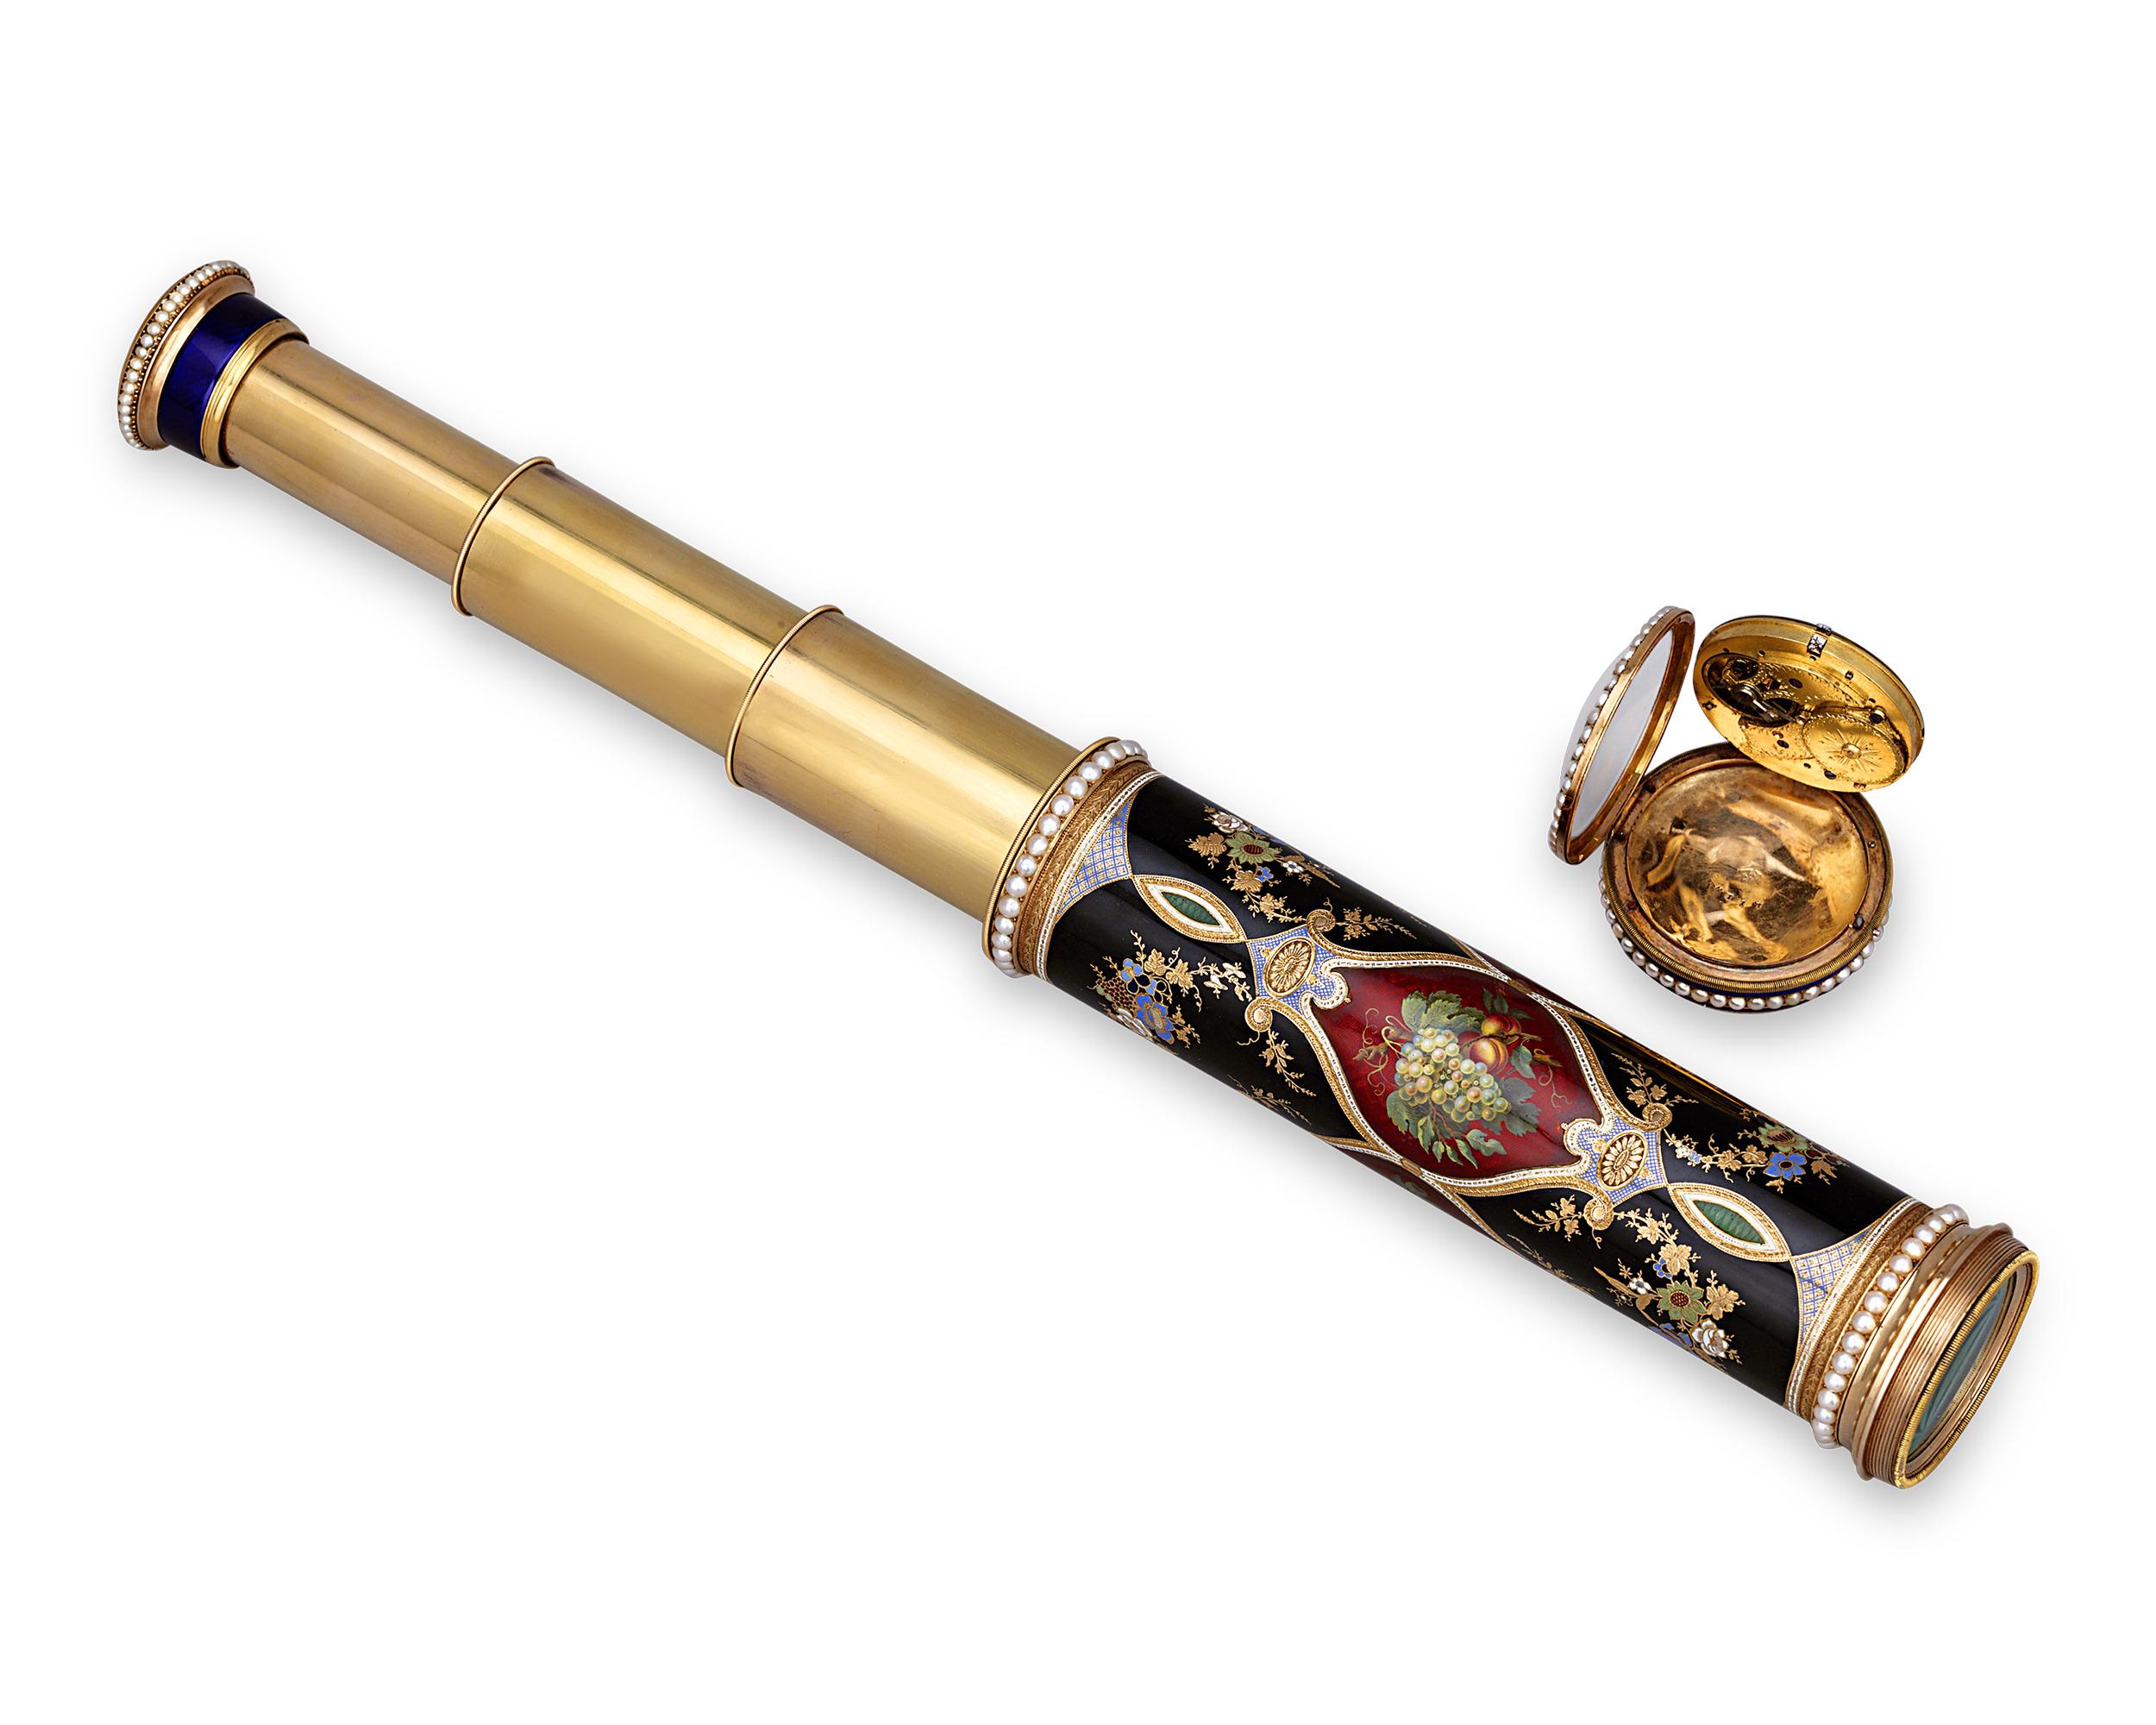 A marriage of 19th-century Swiss scientific achievement and artistic mastery, this exceptionally rare pearl, gold and enamel telescope is an item of extraordinary luxury. An extending telescope, the front lens is set with a detachable pocket watch